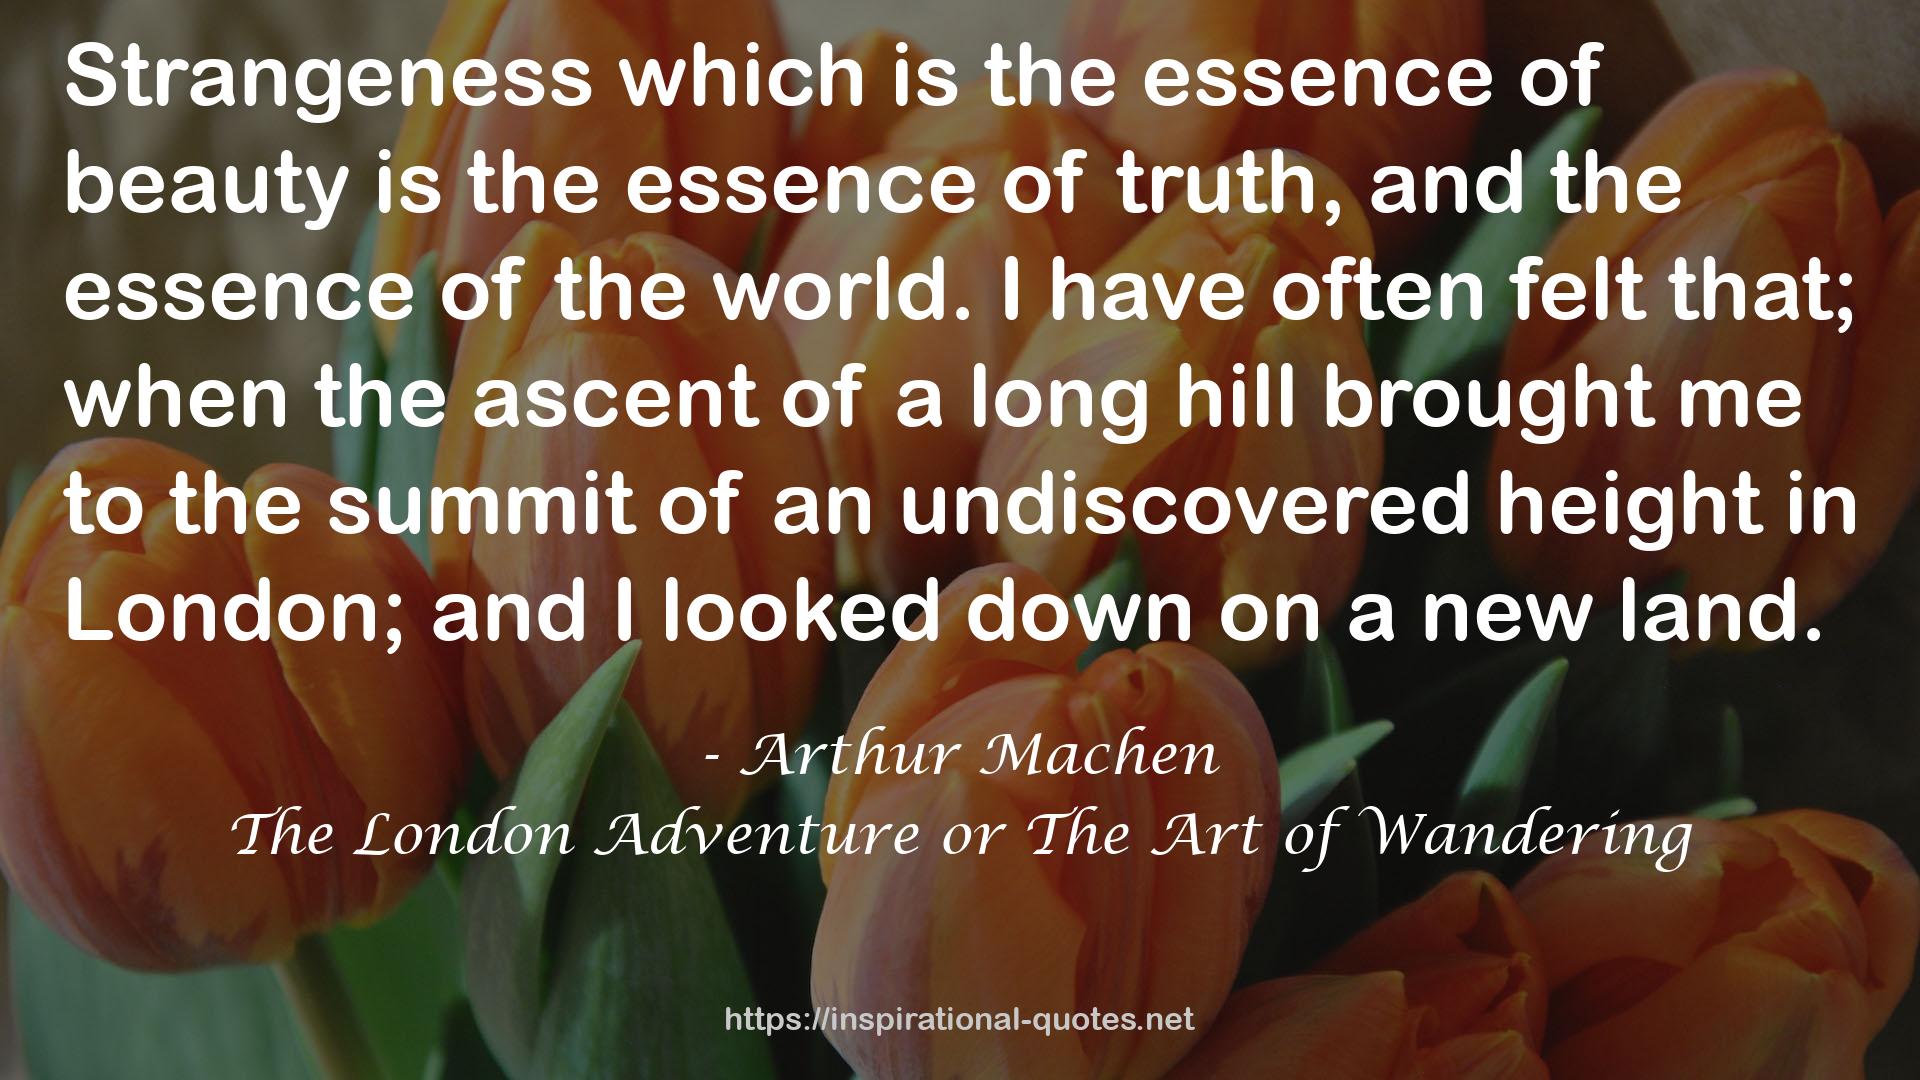 The London Adventure or The Art of Wandering QUOTES